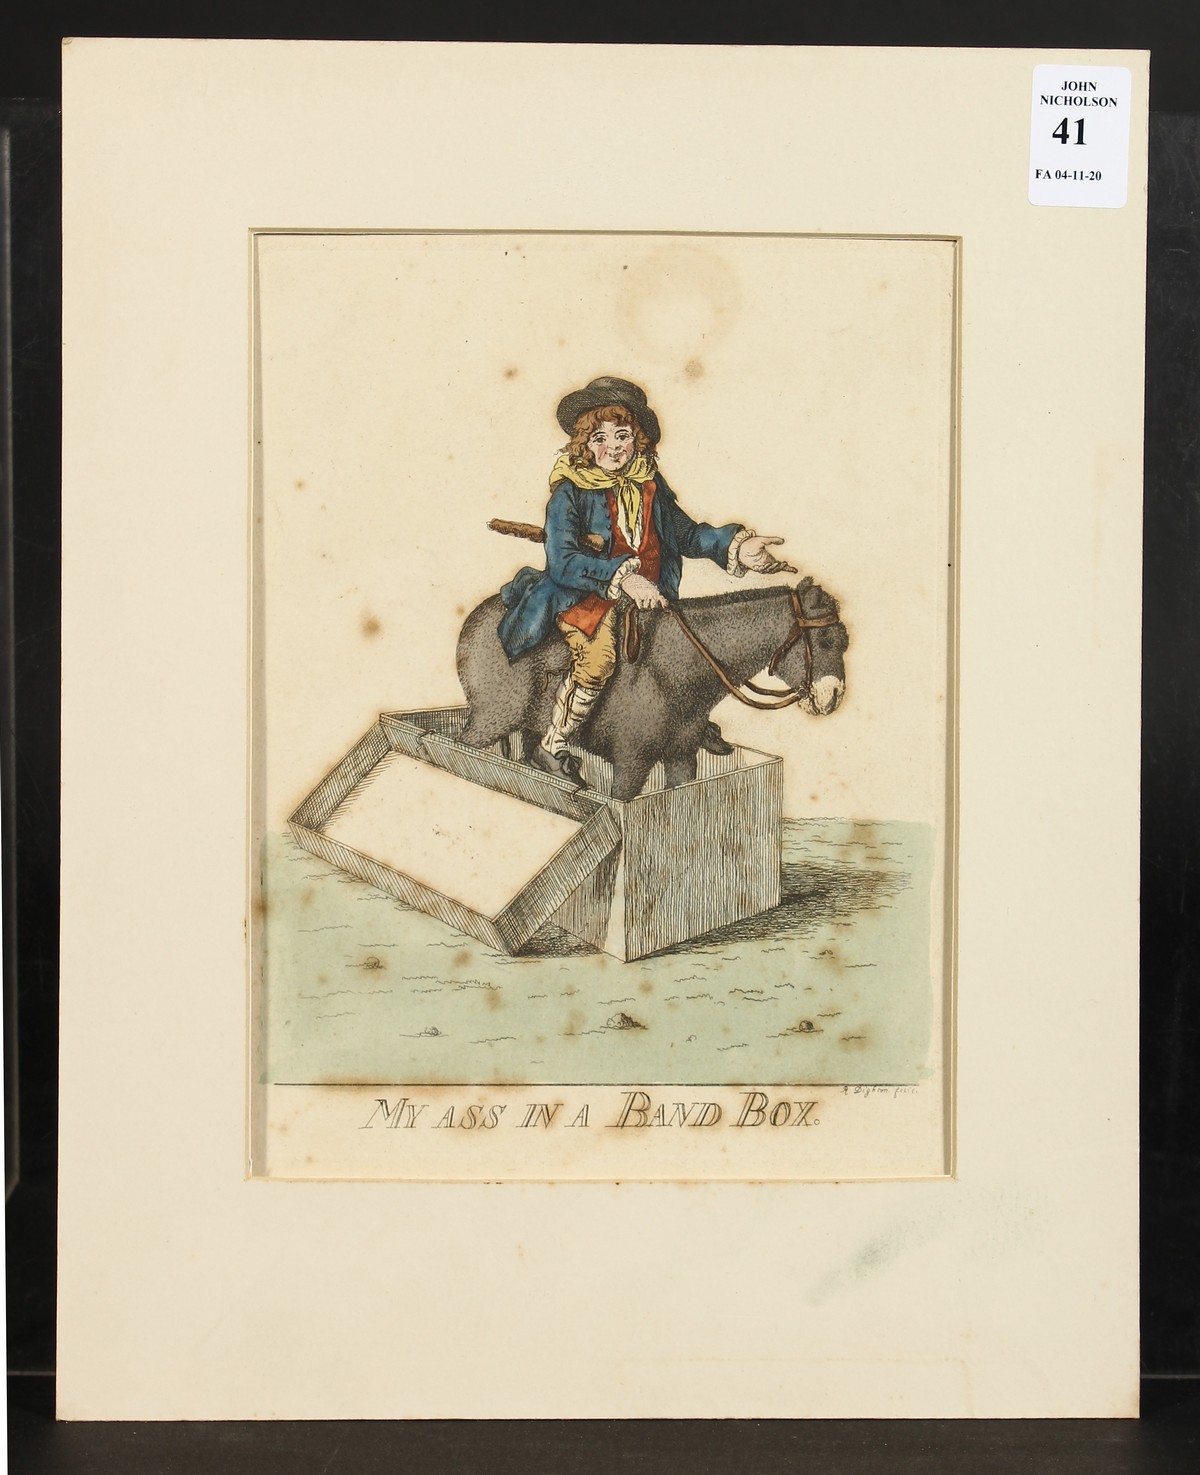 After Dighton, 'My Ass in a Band Box', a hand coloured print, 8" x 6", unframed. - Image 2 of 4